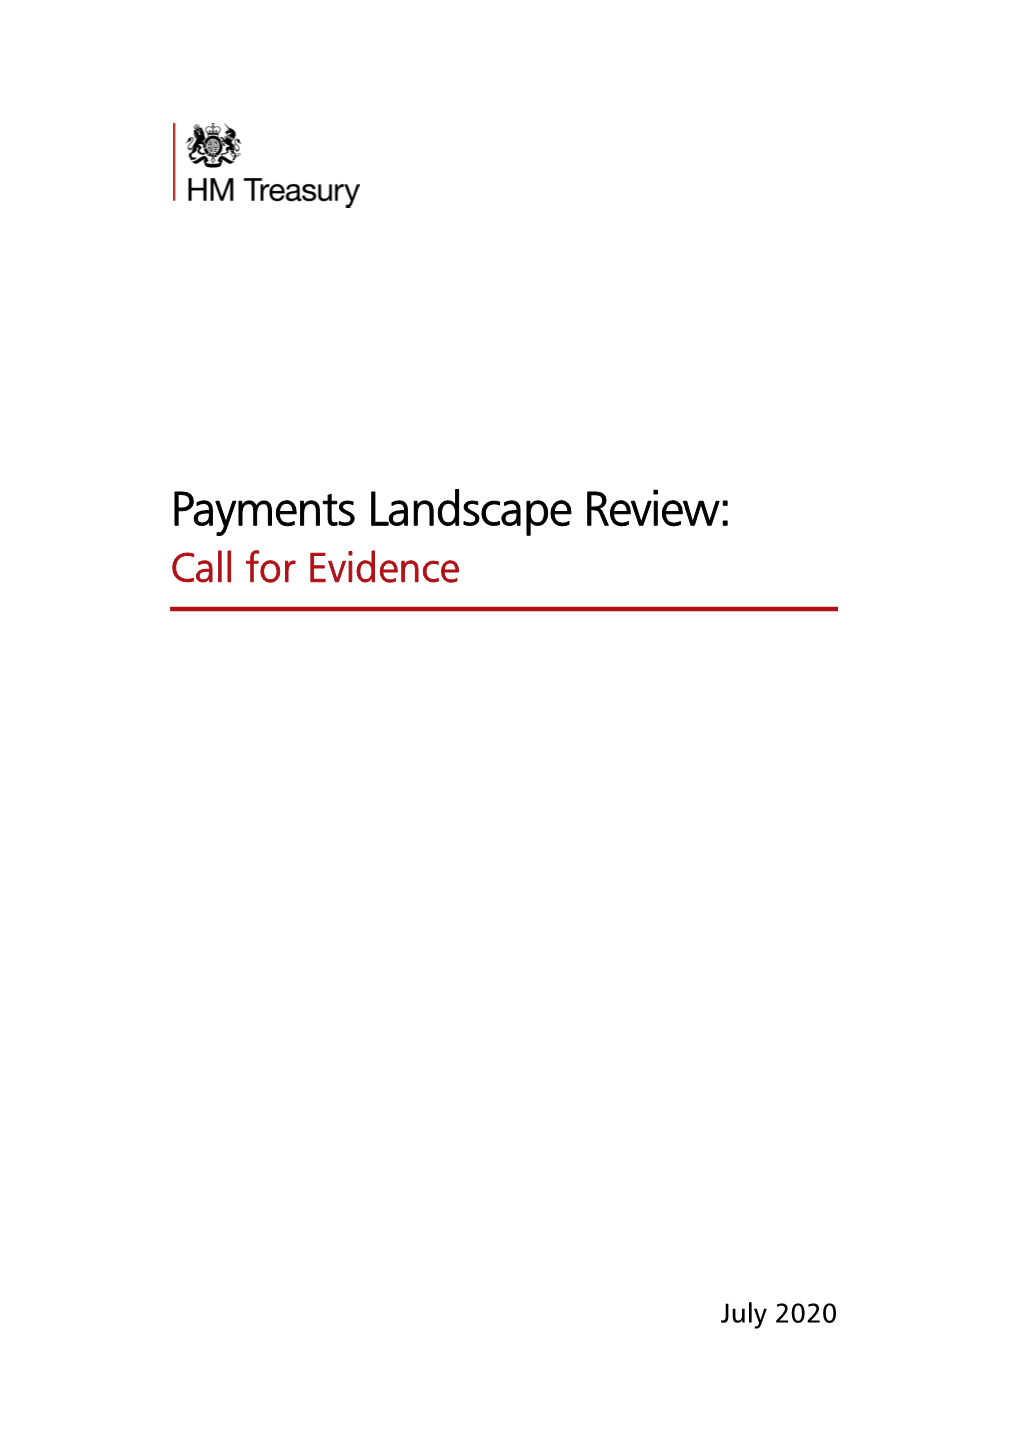 Payment Landscape Review: Call for Evidence